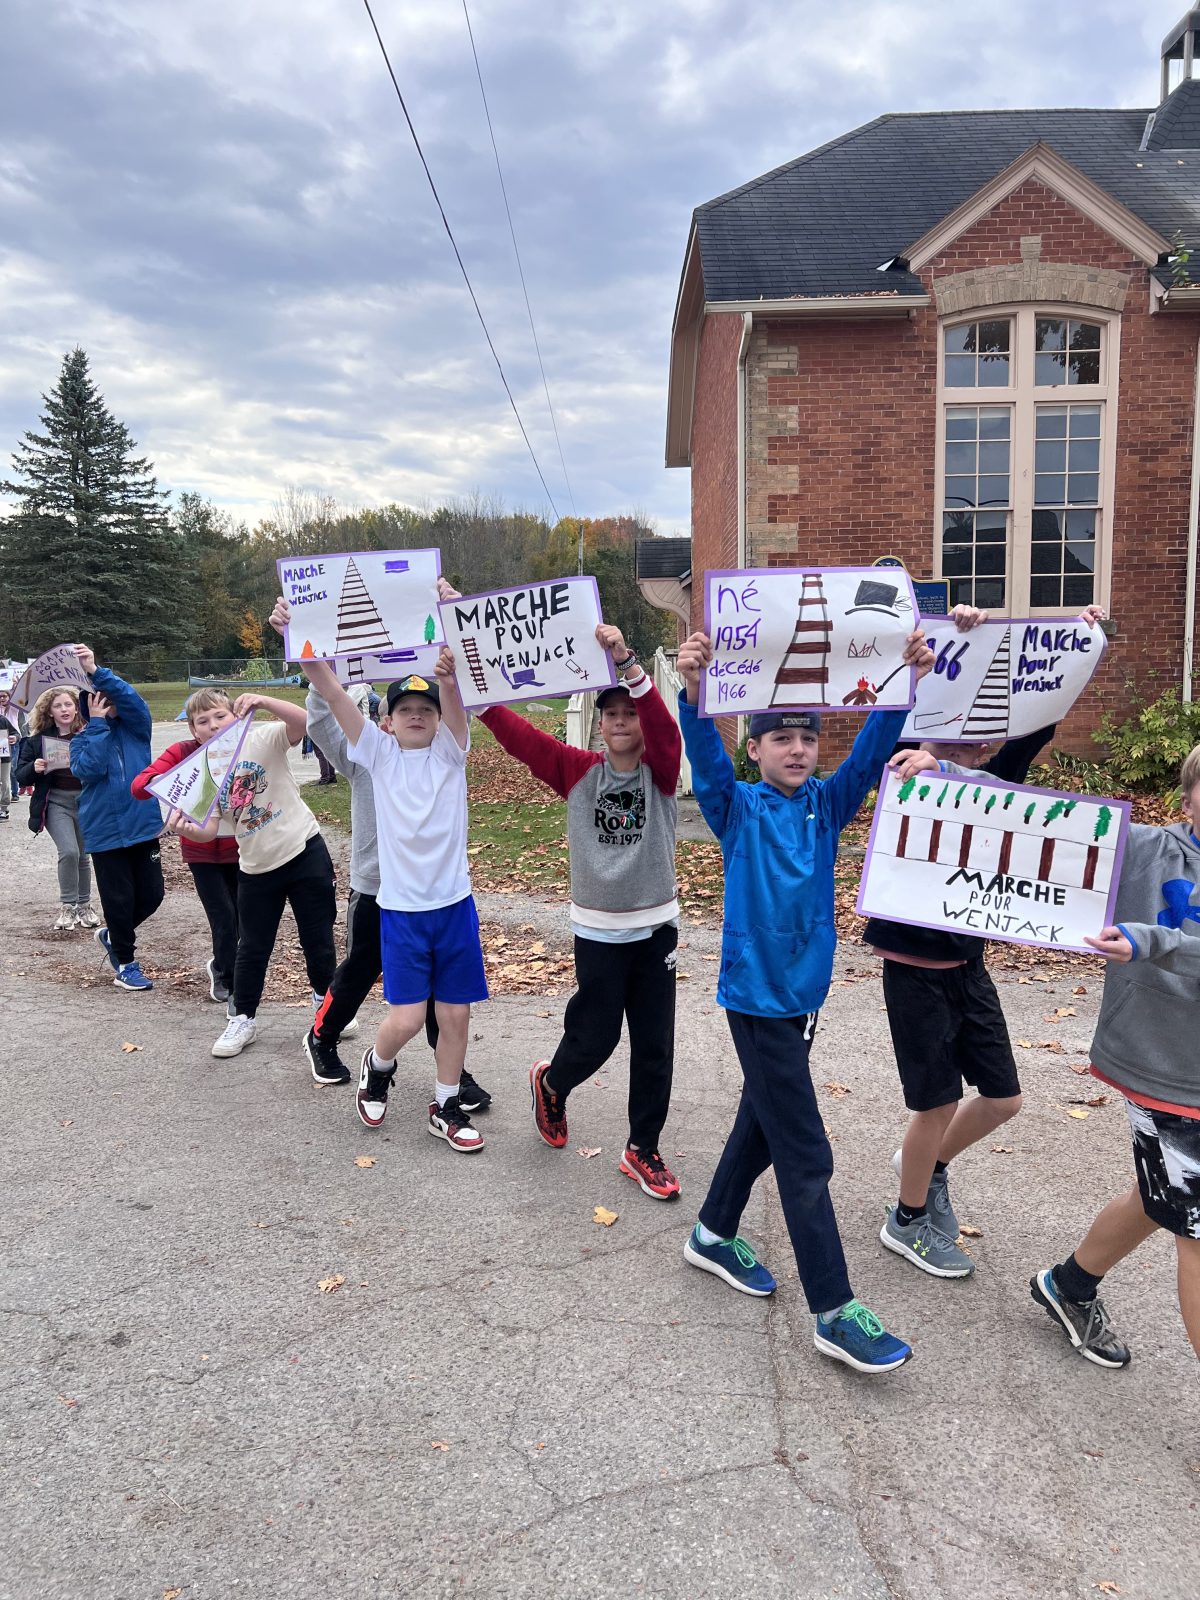 UCDSB Schools Participate in Walk for Wenjack Events, Raising Funds and Promoting Reconciliation